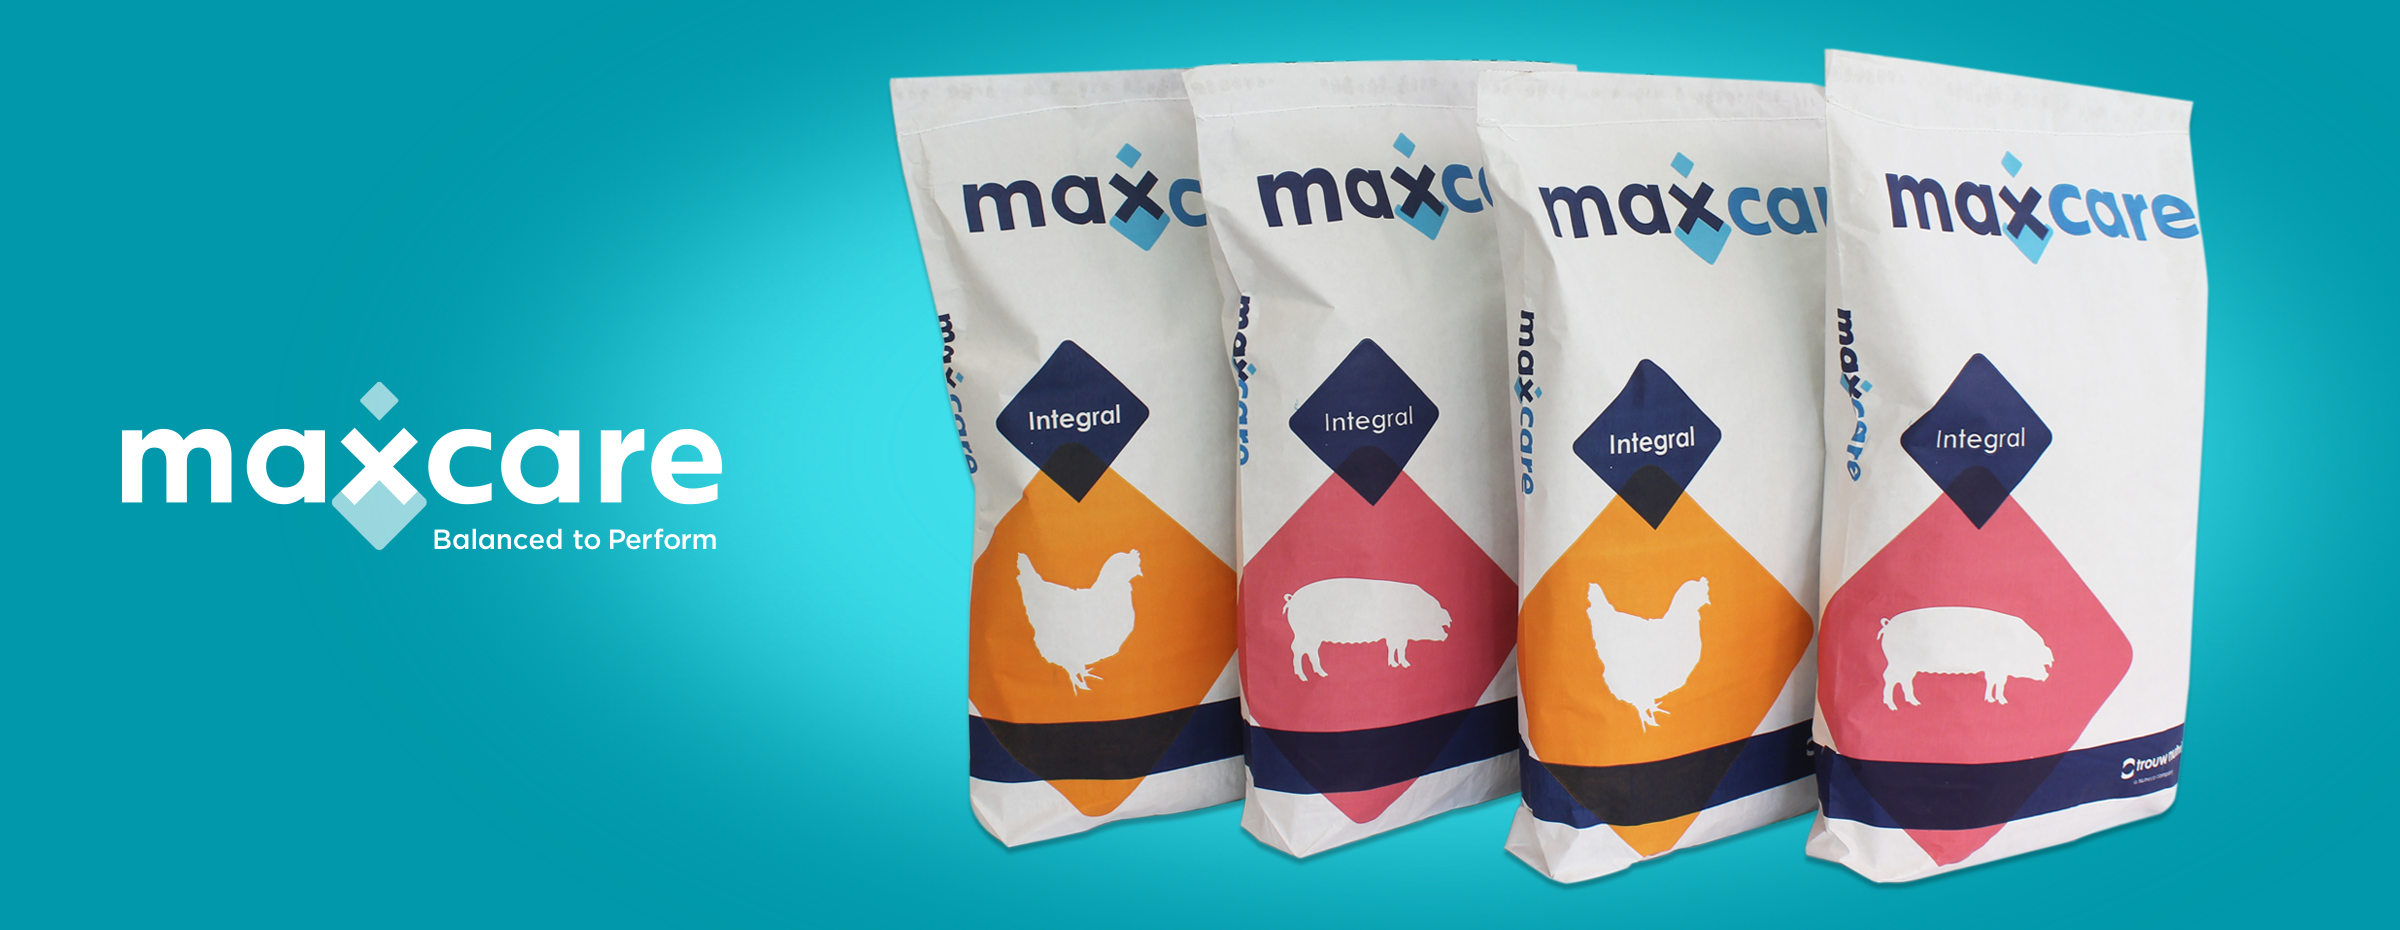 Enrich livestock nutrition with Maxcare feed supplements